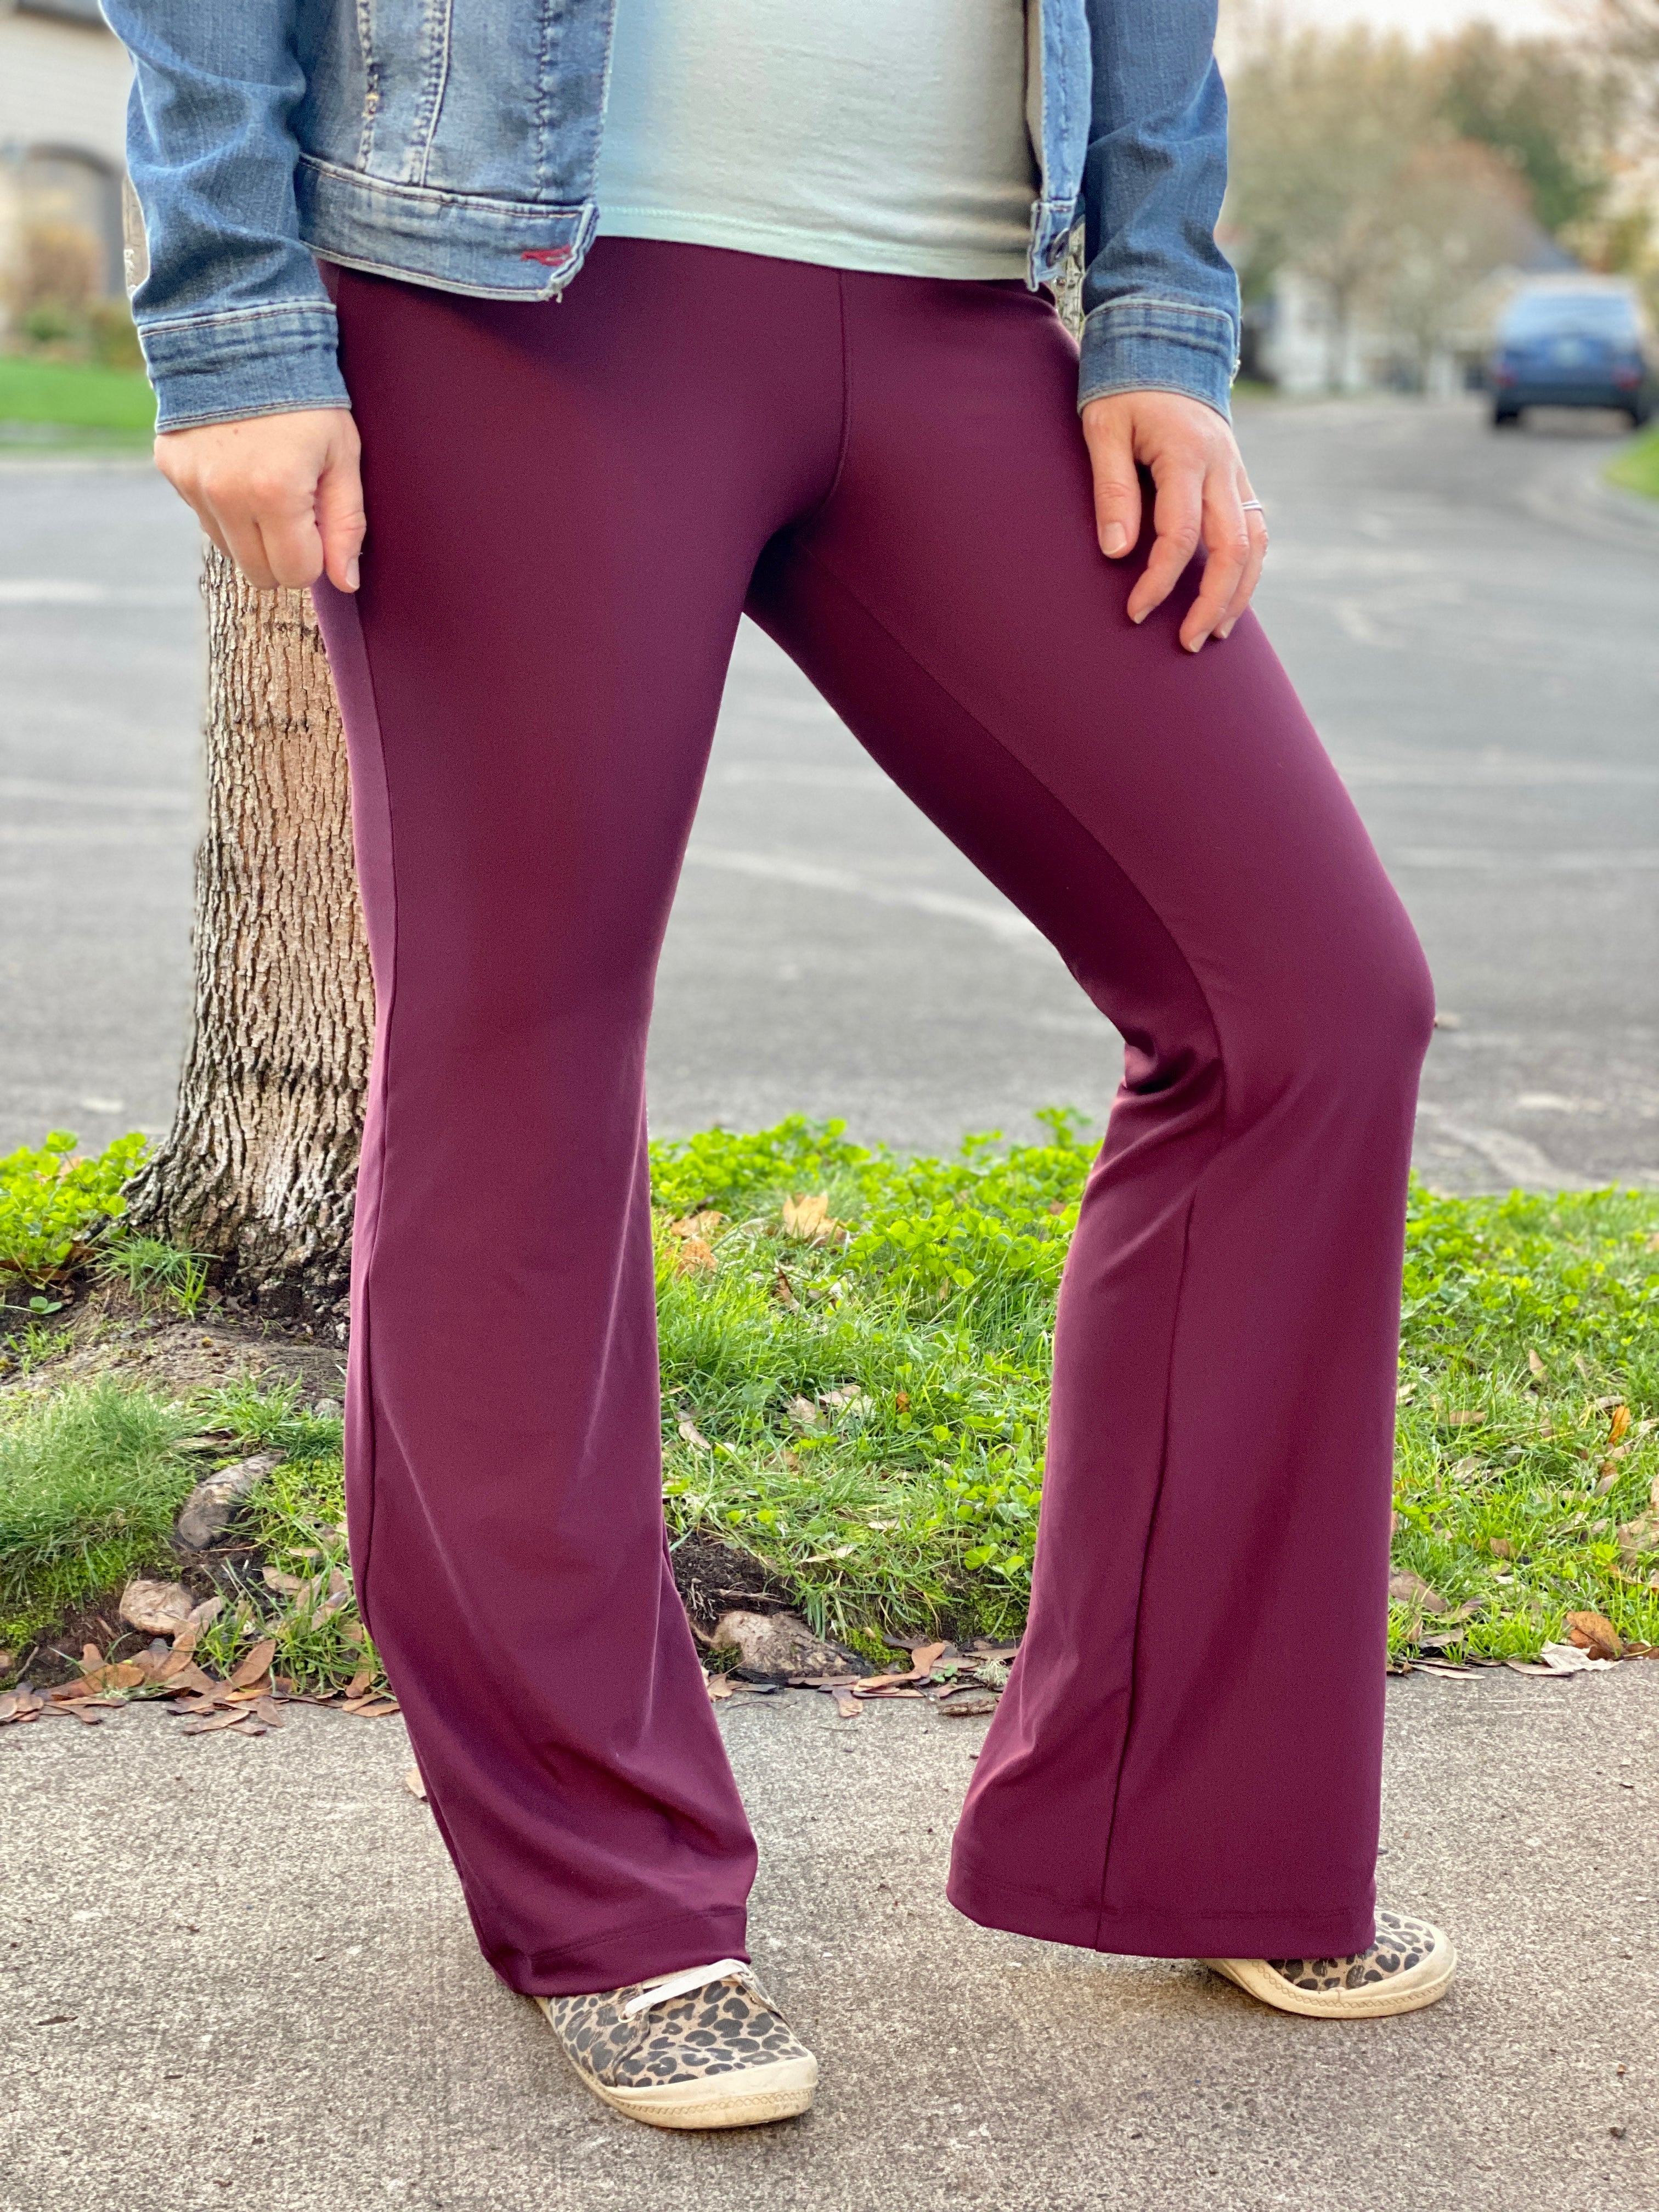 Midge Flare Pants and Leggings - 5 out of 4 Patterns